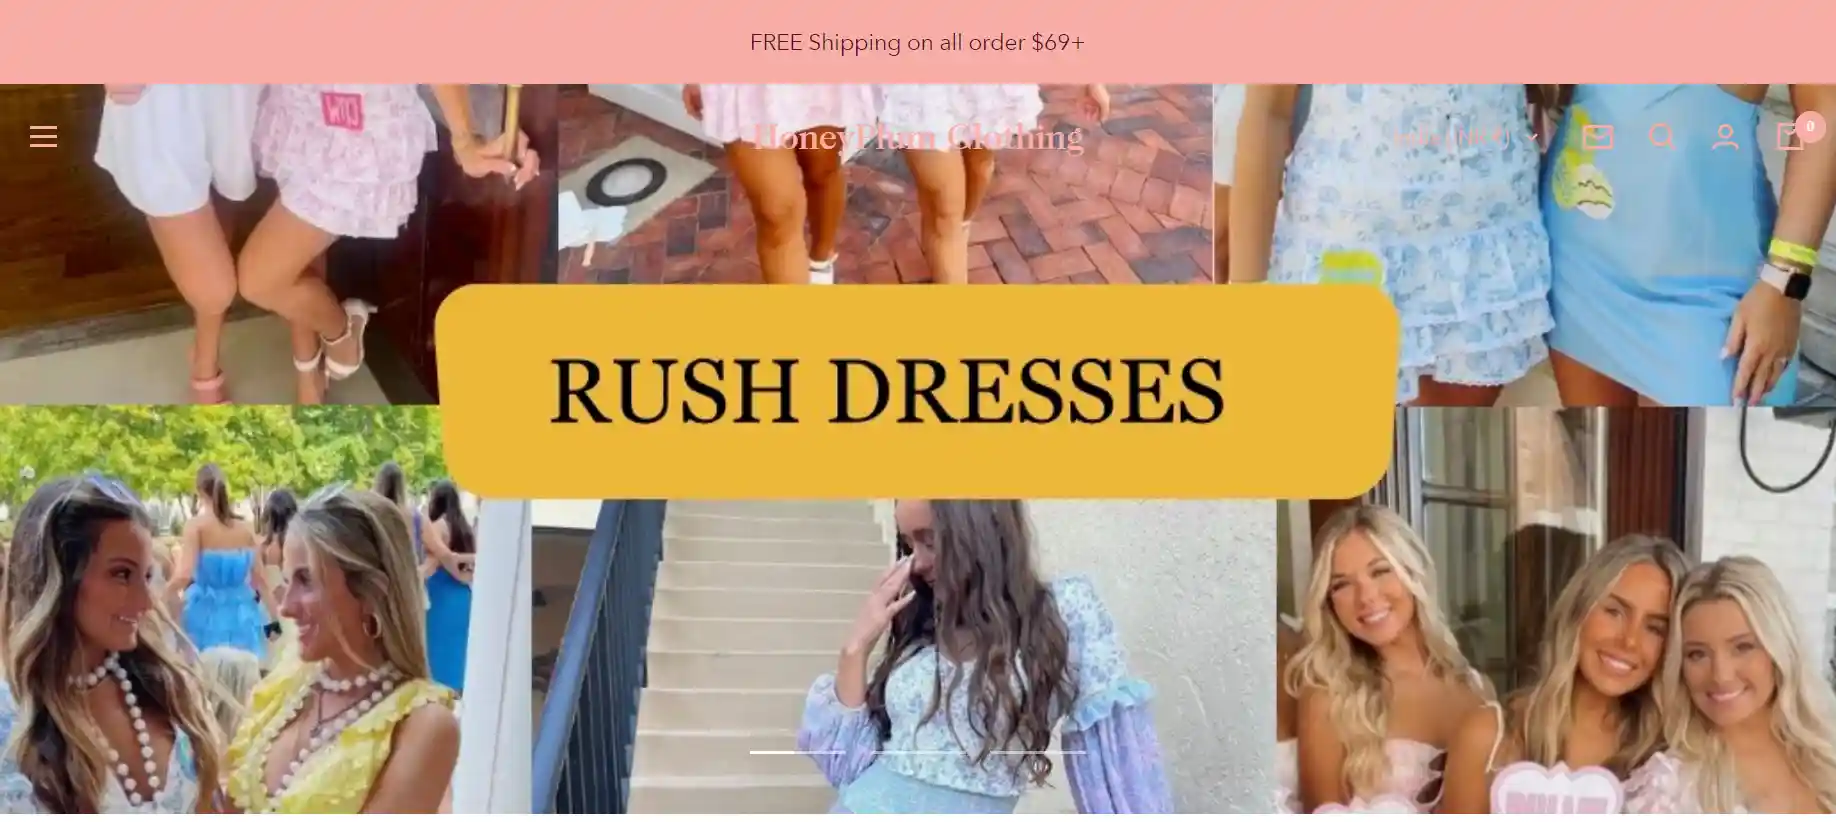 You are currently viewing Honey Plum Clothing Reviews – Is It Legit or a Scam?